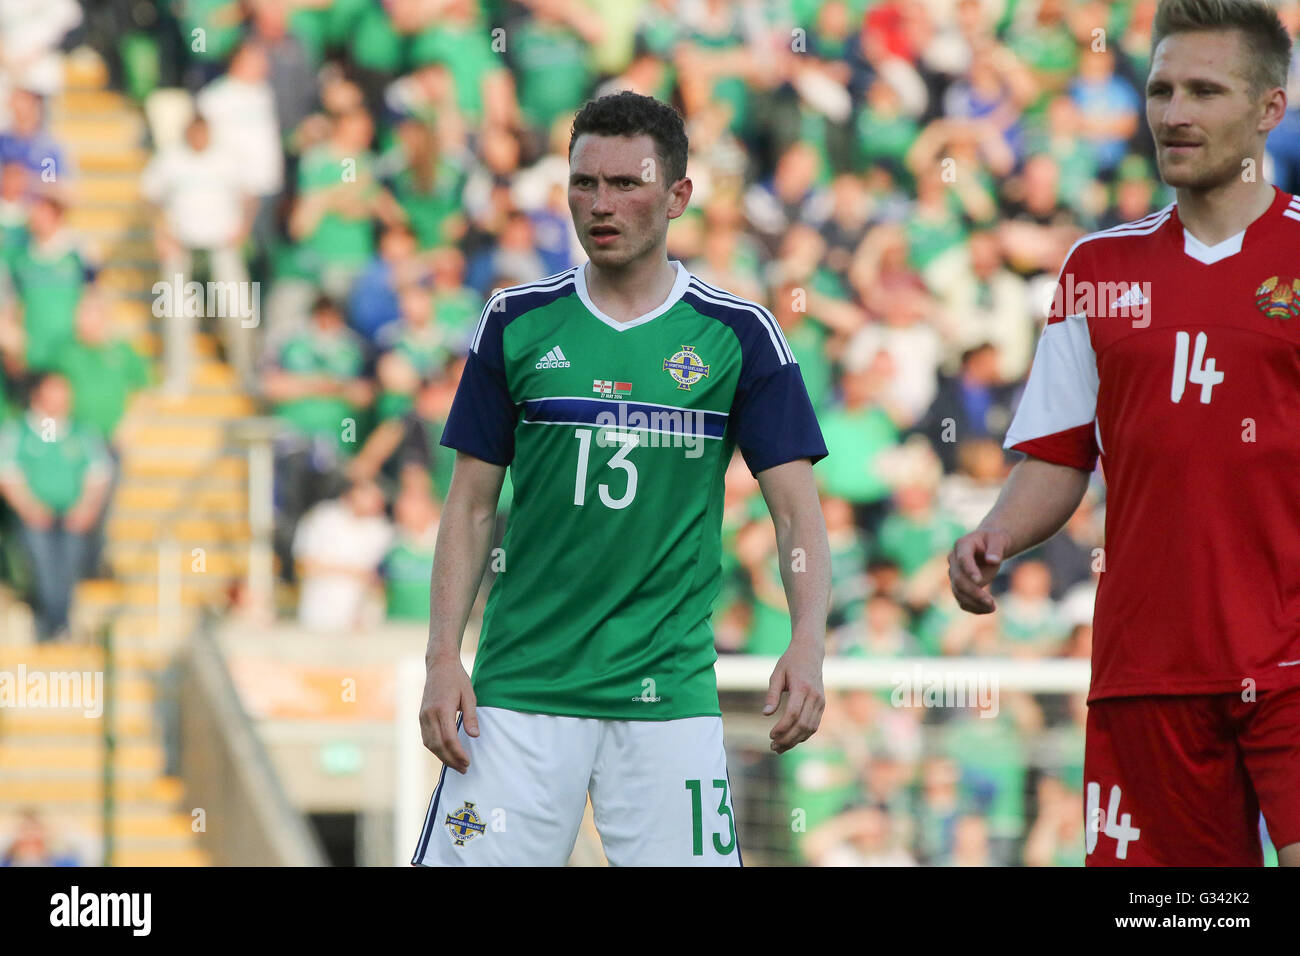 27th May 2016 - Vauxhall International Challenge (Friendly). Northern Ireland 3 Belarus 0. Northern Ireland's Corry Evans (13) in action. Stock Photo